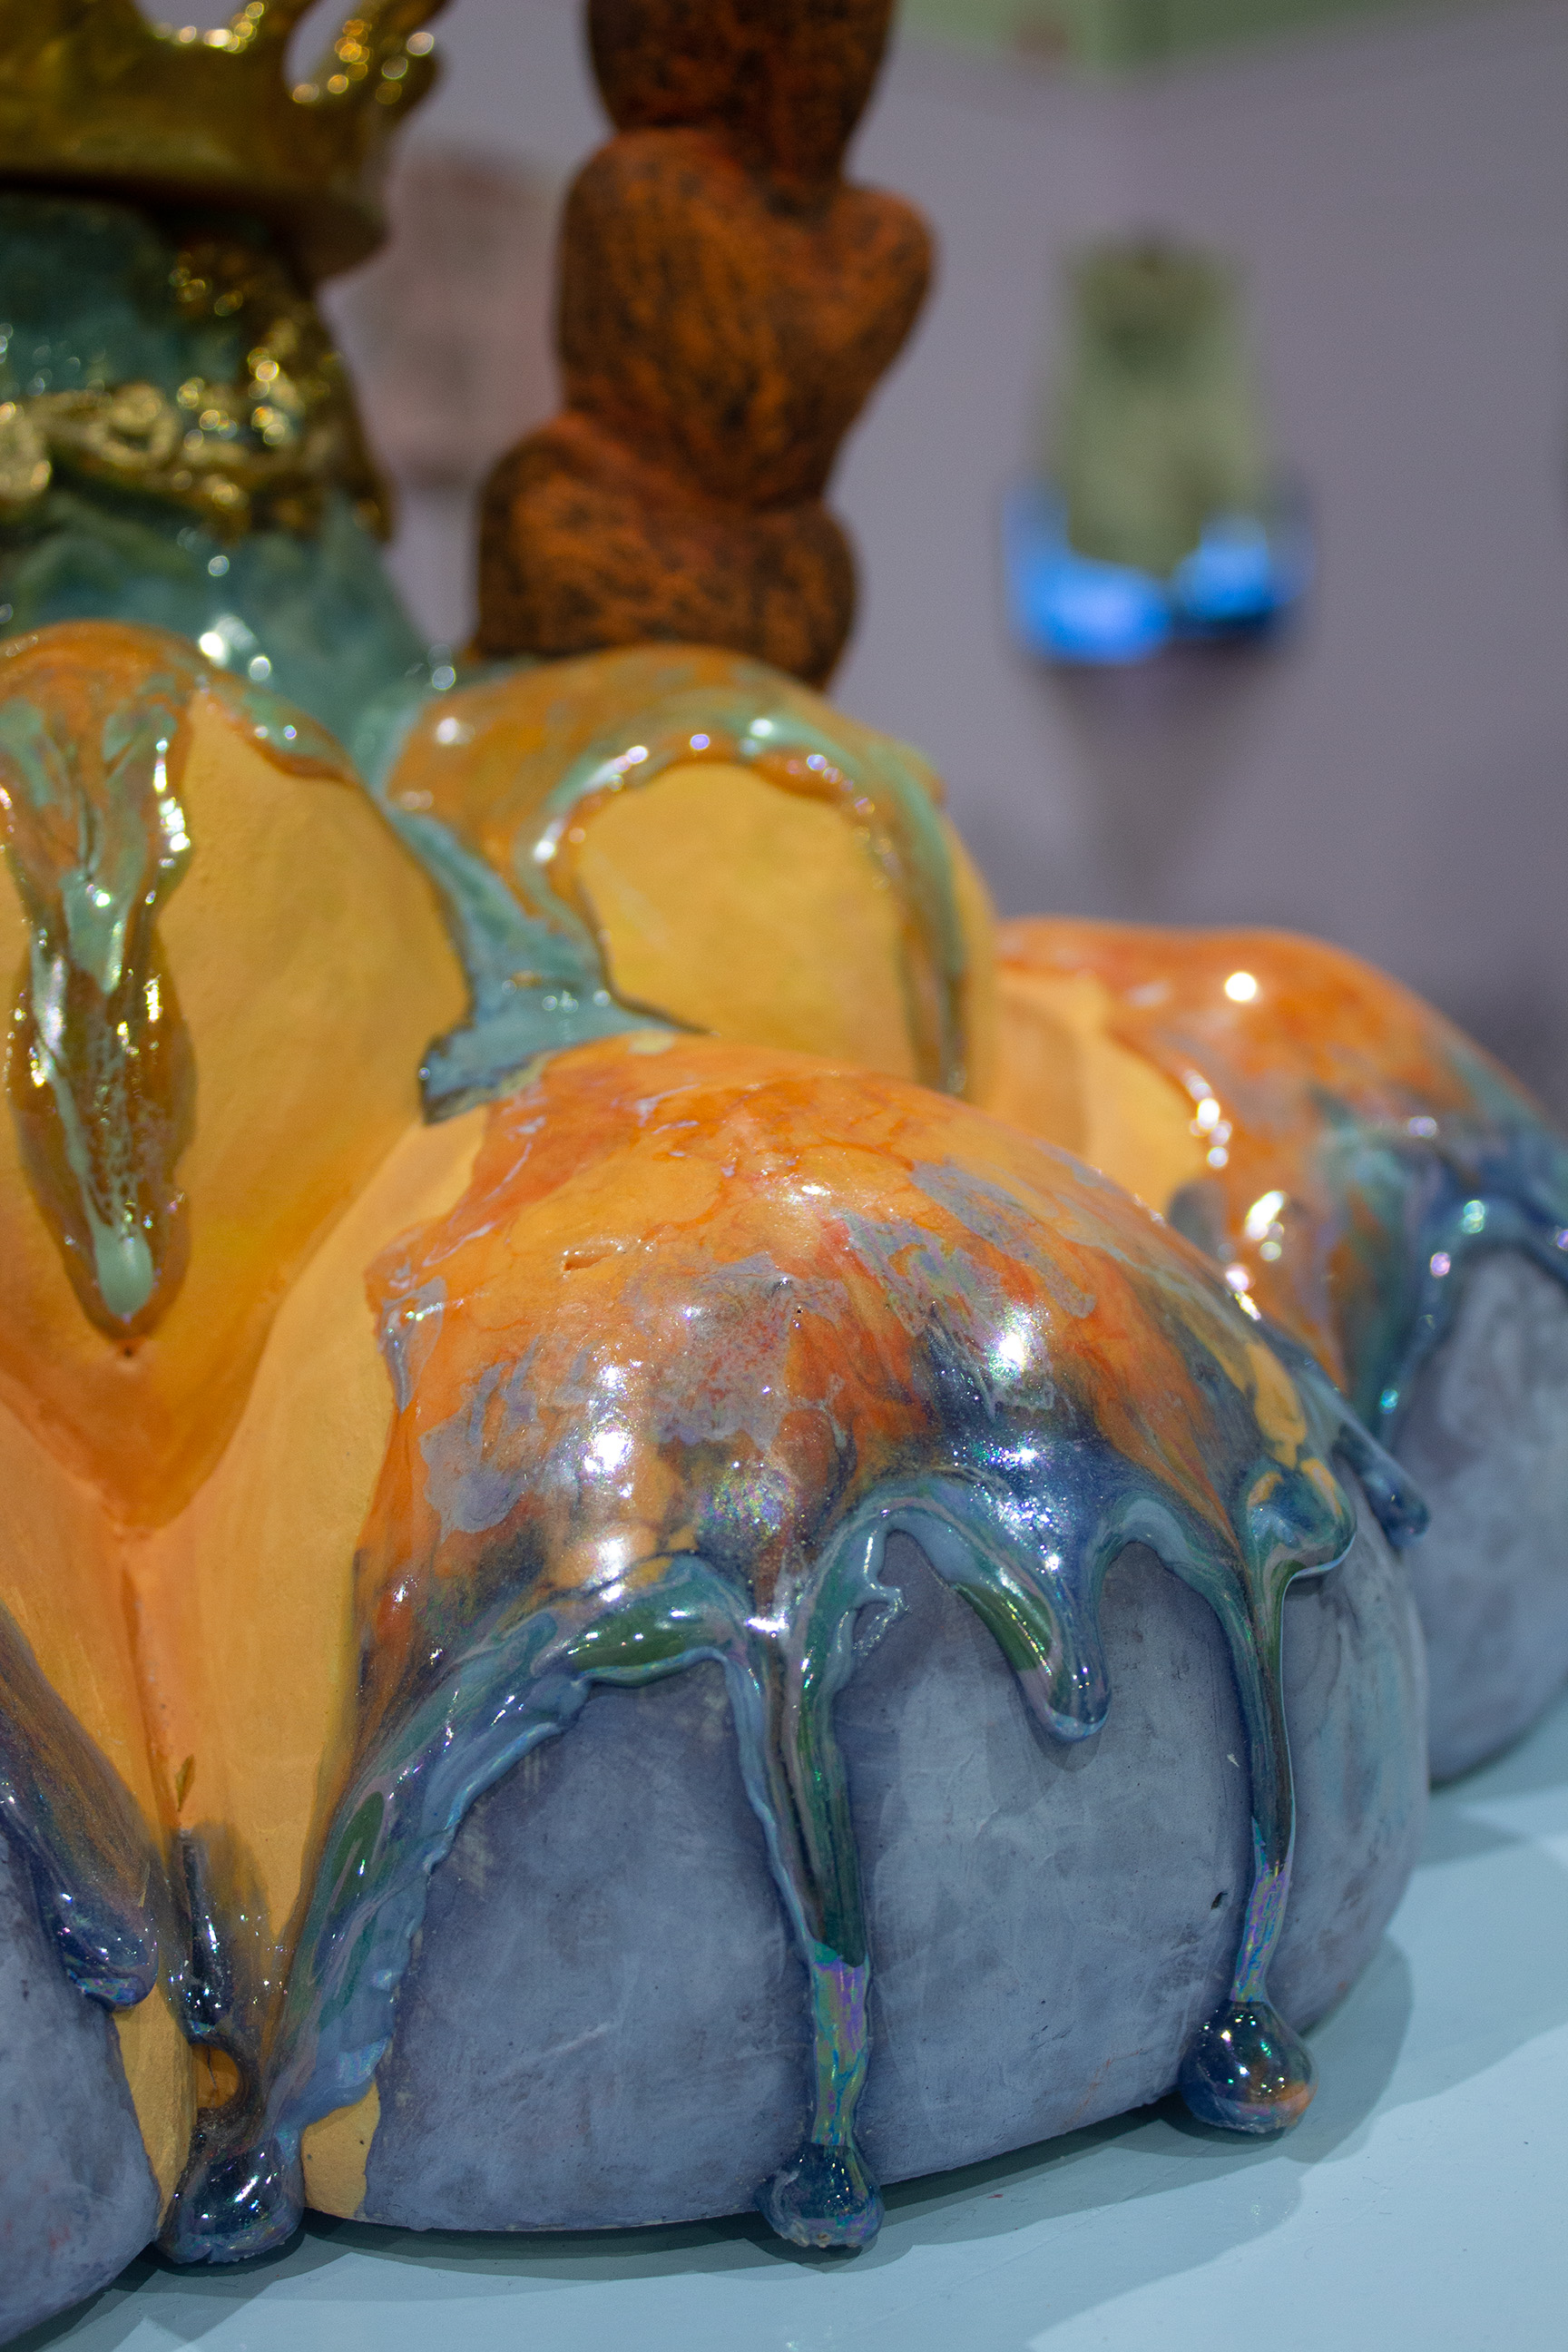 /Close-up%20of%20a%20glossy%20ceramic%20flower%20sculpture%20with%20vibrant%20hues%2C%20featuring%20drip-like%20textures.%20